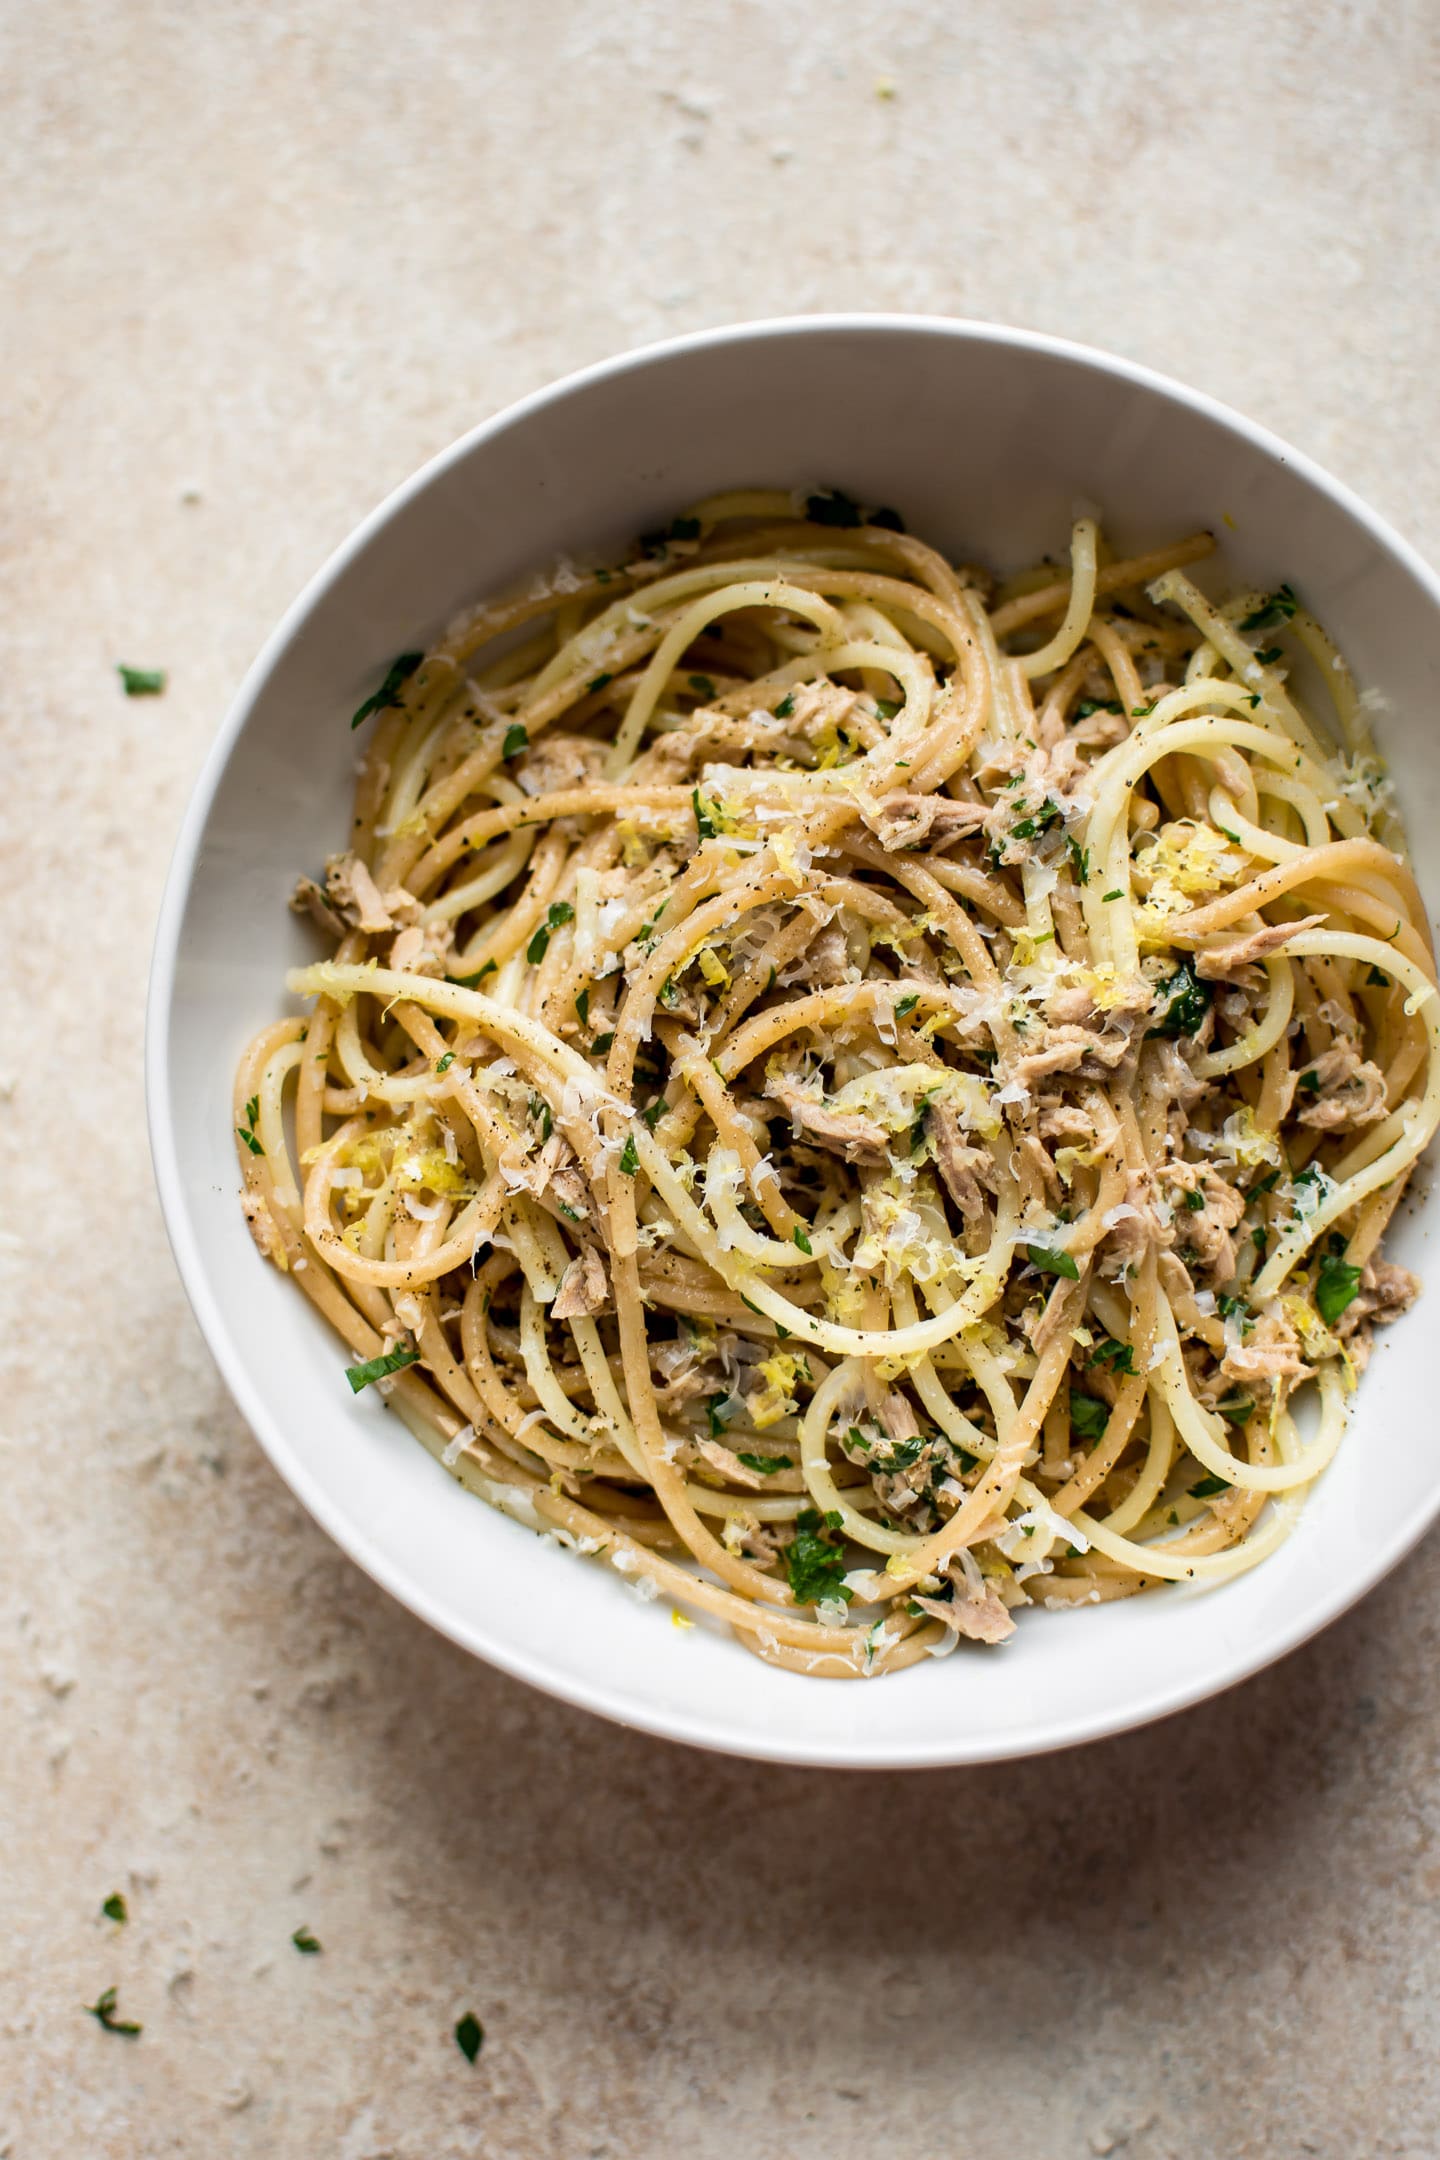 Save 15 Minutes Every Time You Make Pasta